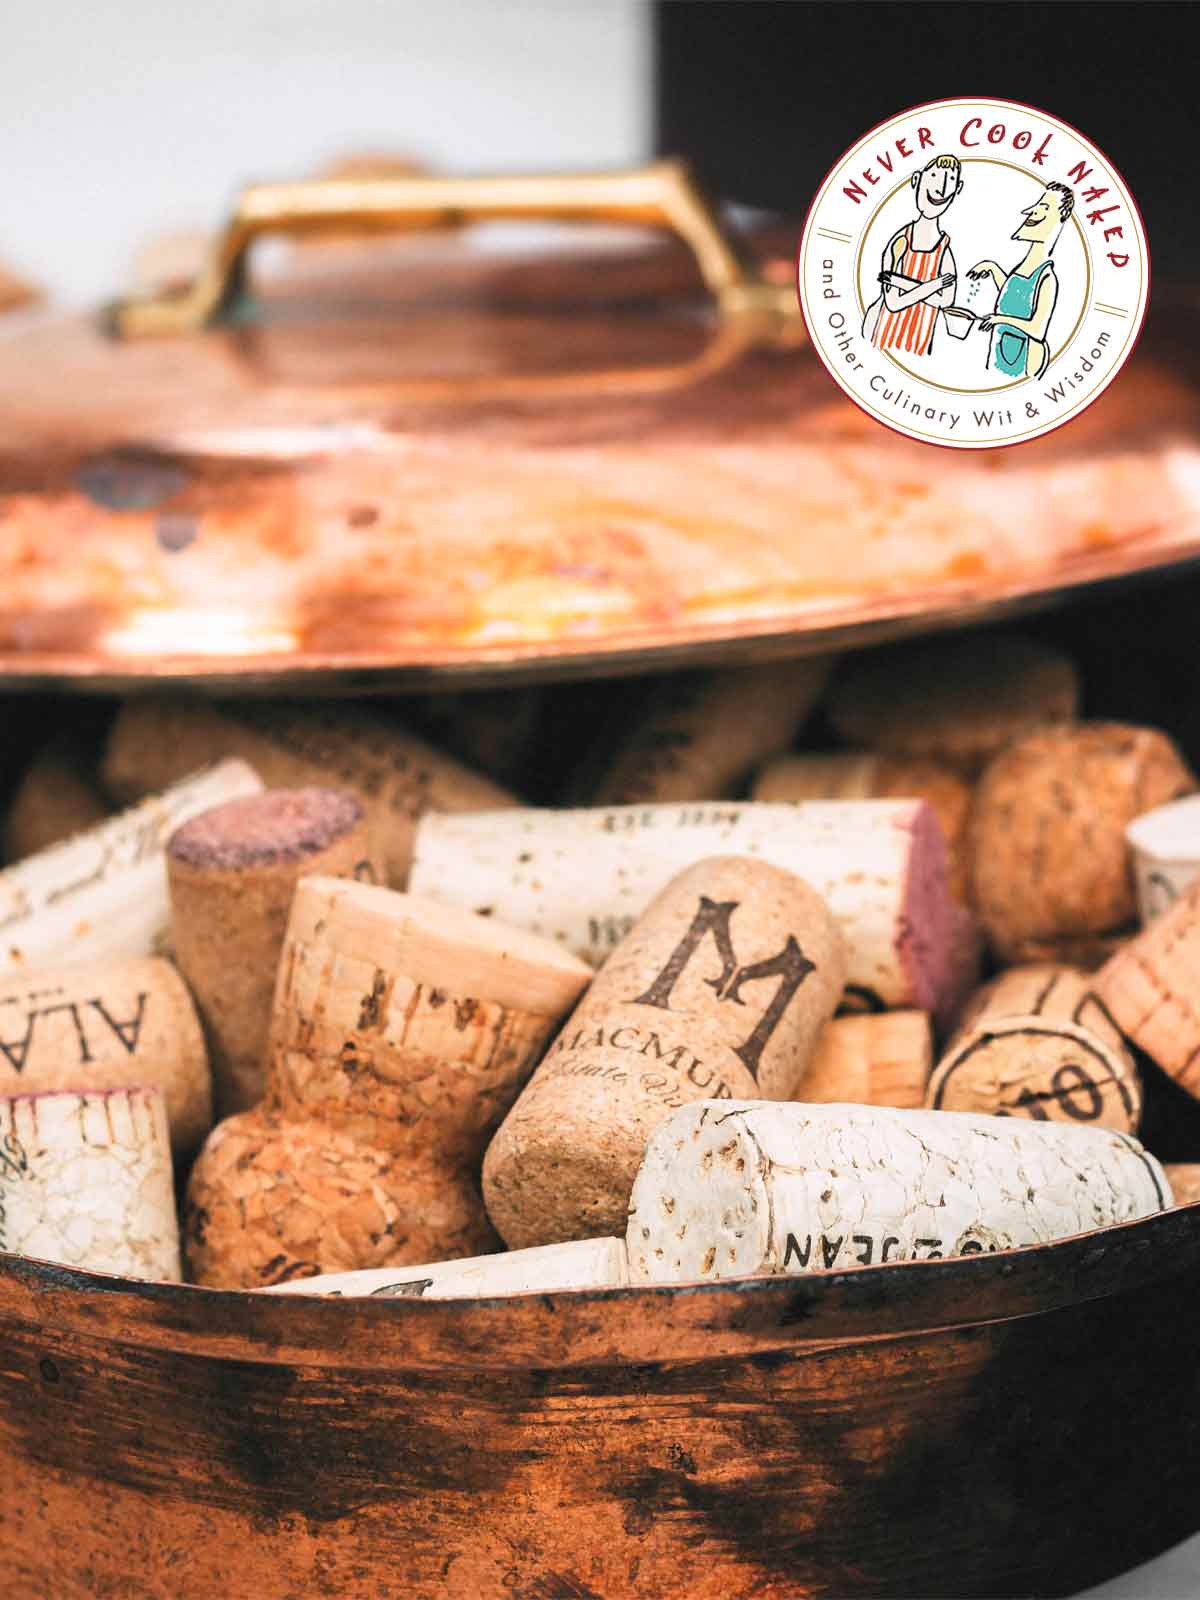 A pot filled with wine corks as illustration of 'What's the Difference Between Cooking With Red Wine Versus White Wine?'